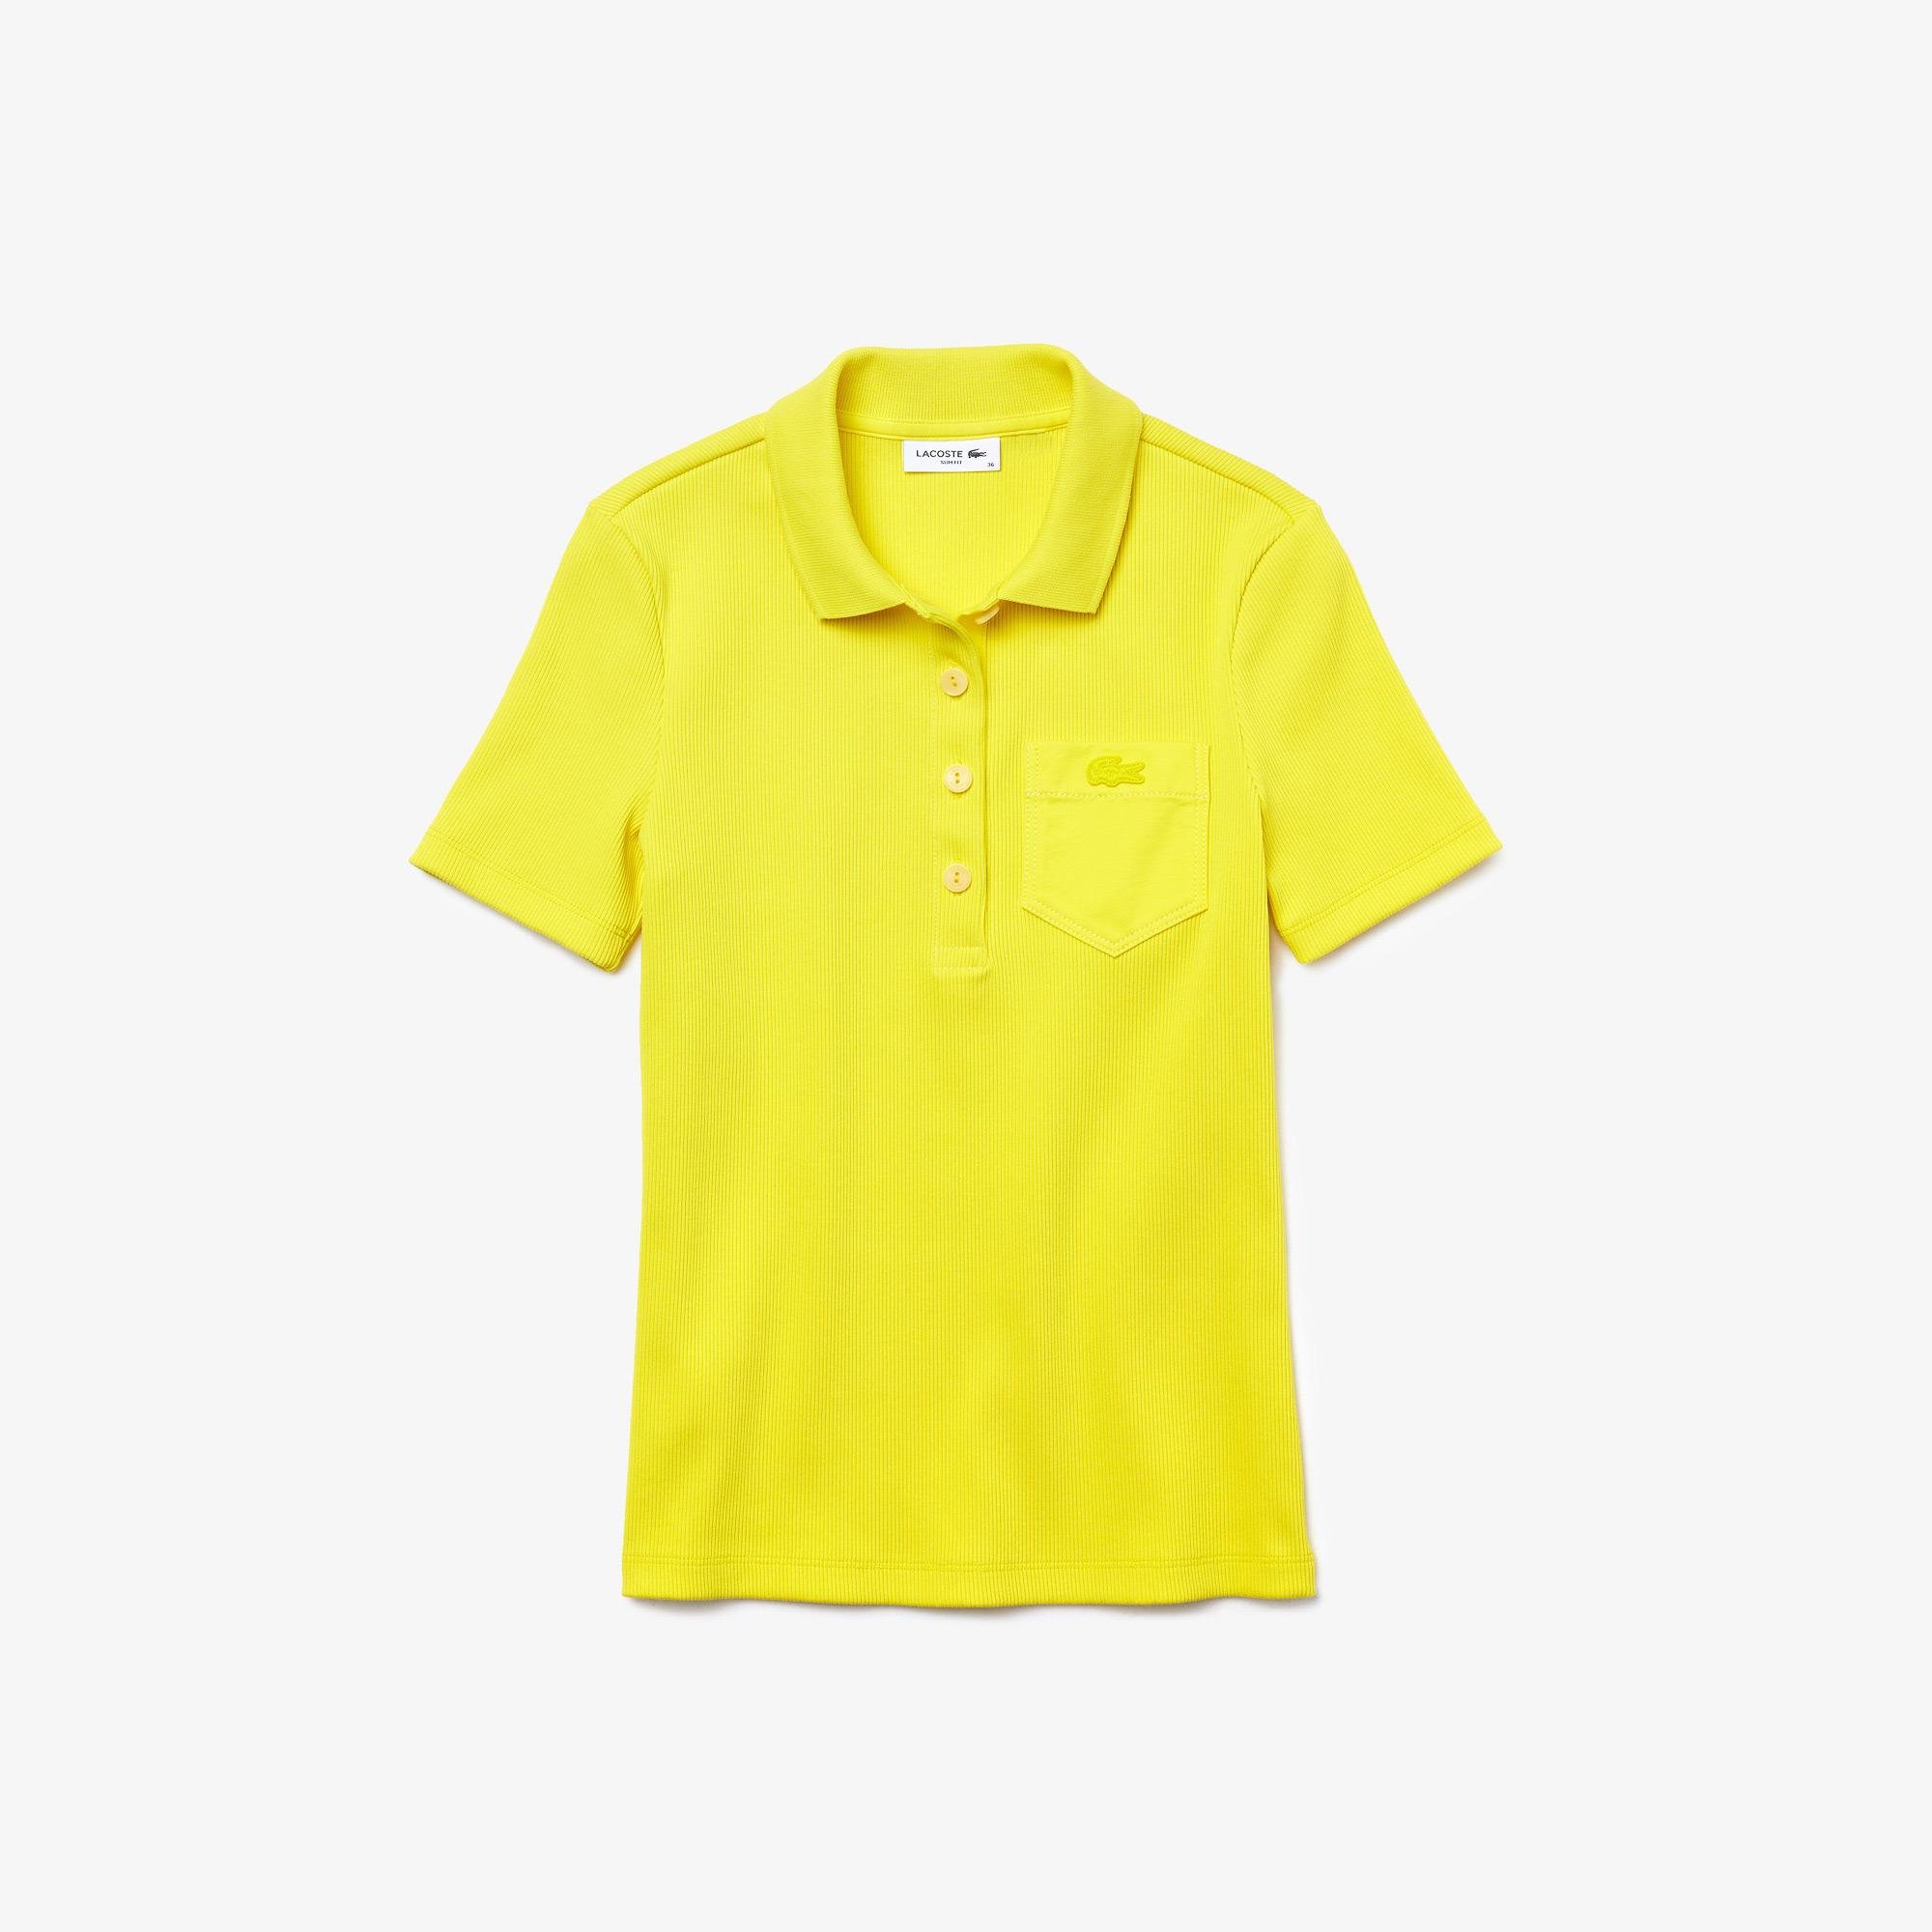 Lacoste women shirt polo Slim Fit from cotton  striped